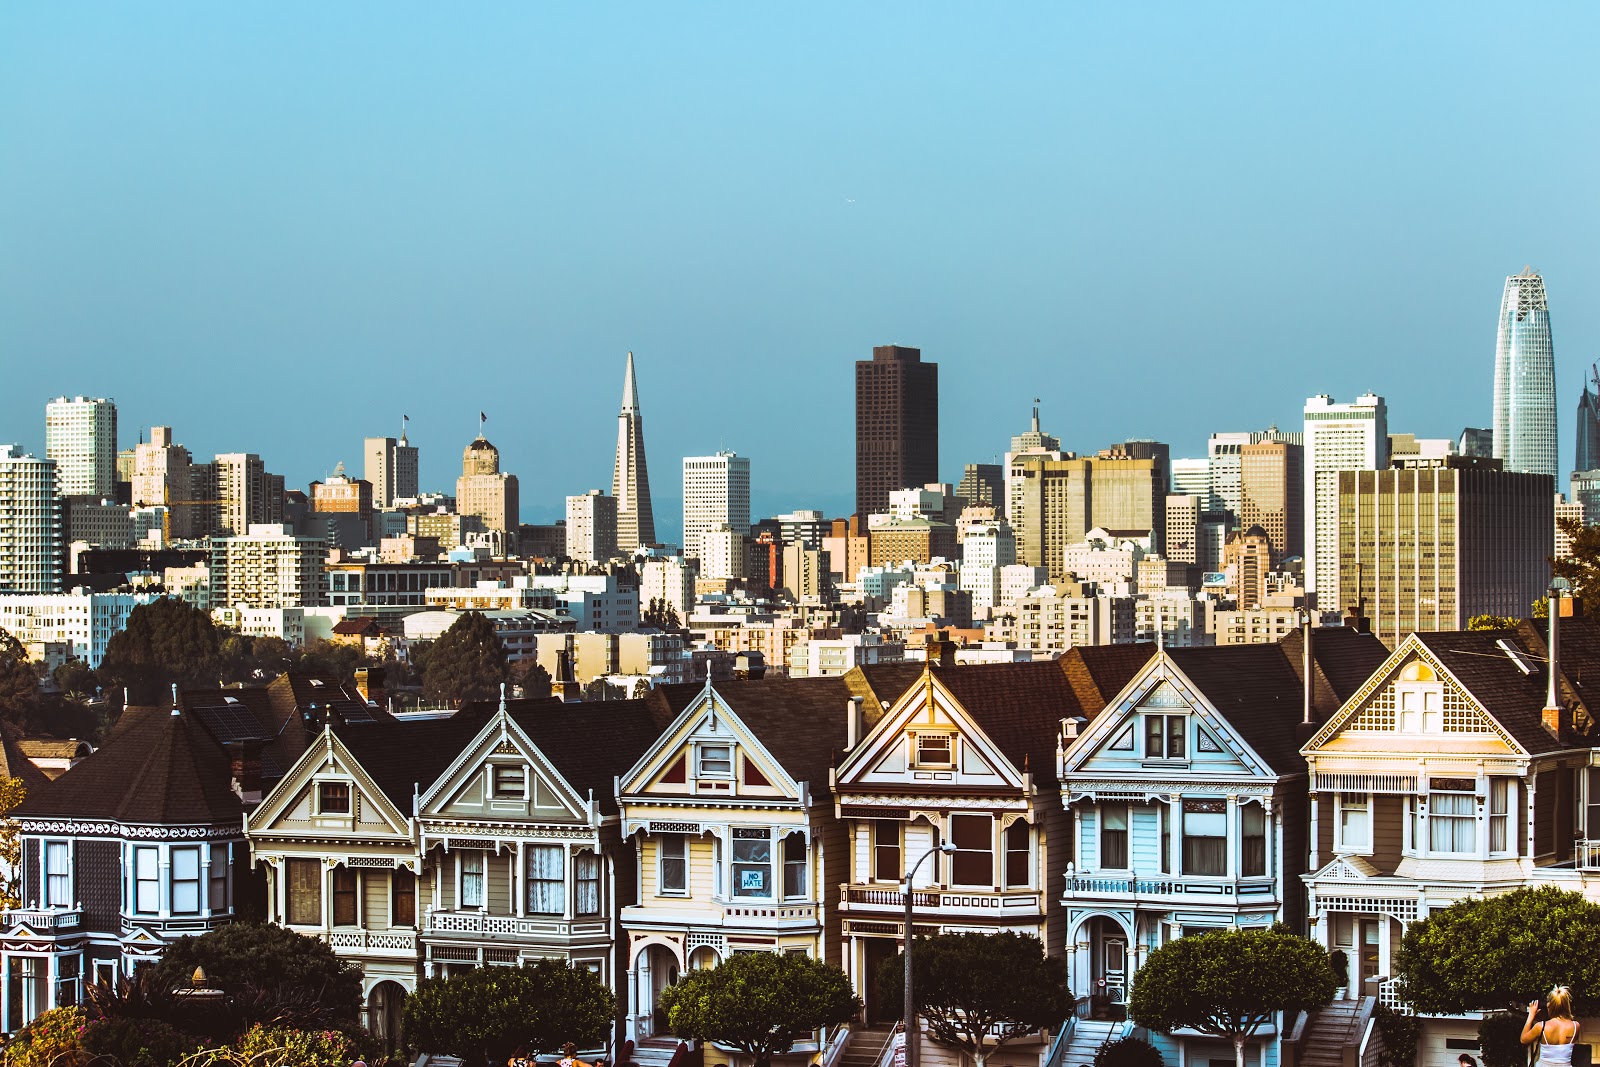 Houses in San Francisco.